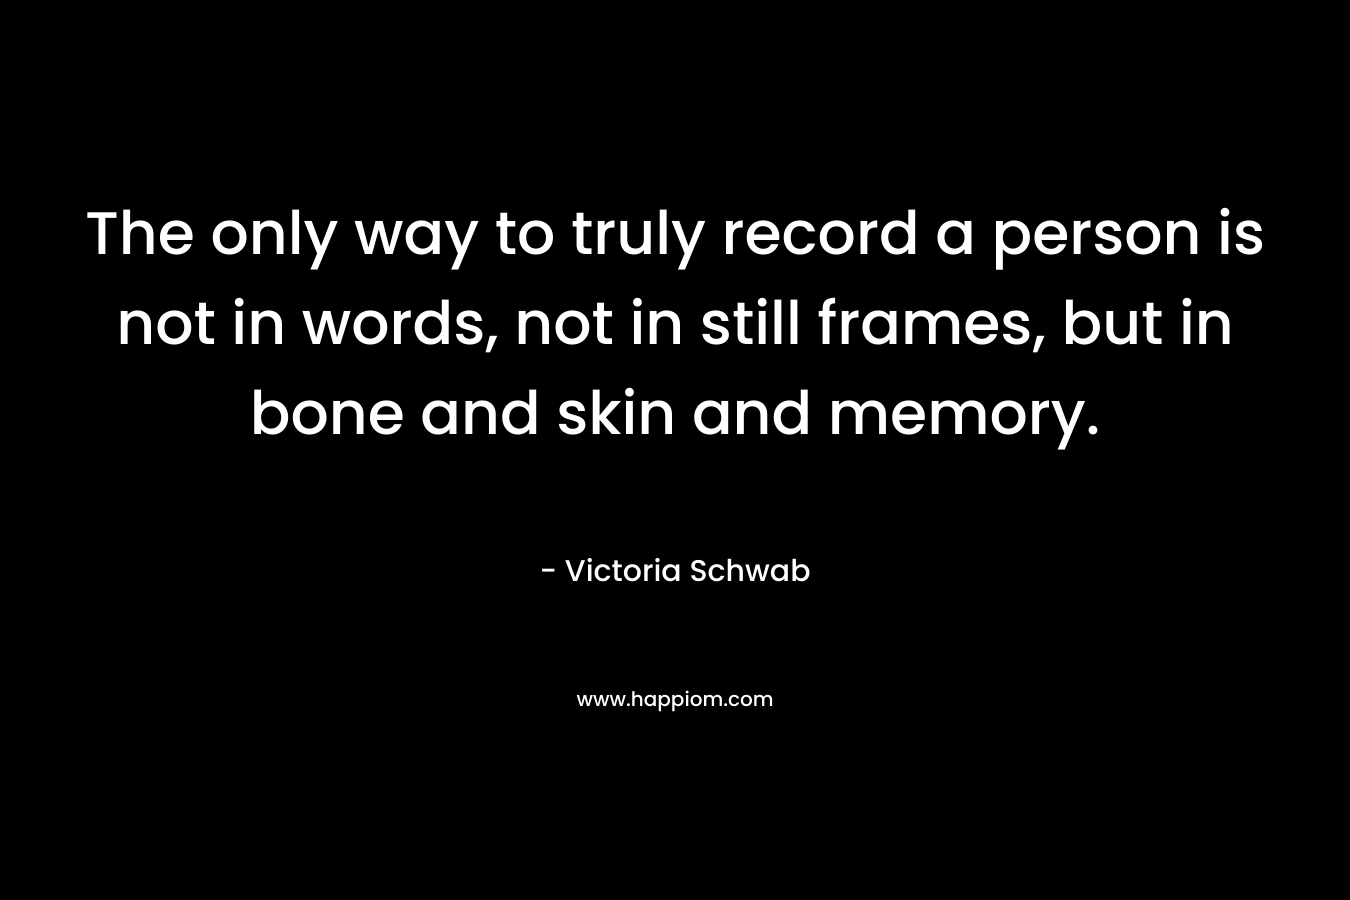 The only way to truly record a person is not in words, not in still frames, but in bone and skin and memory.